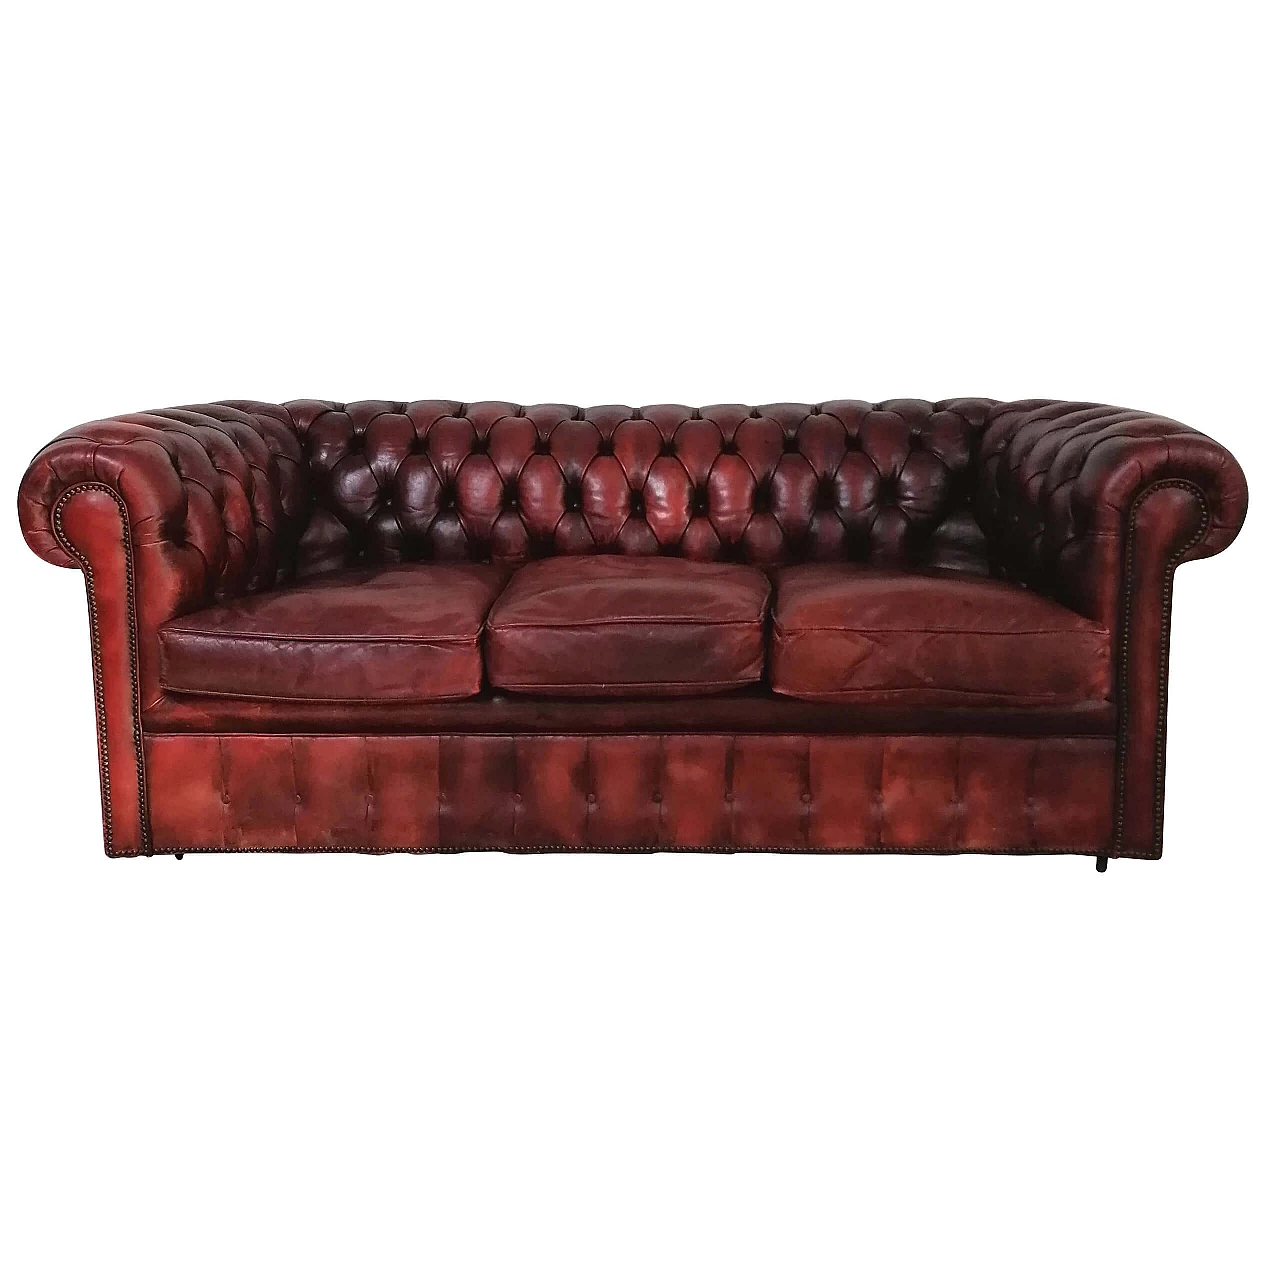 Chesterfield club 3 seats sofa in bordeaux red leather, 60s 1247868